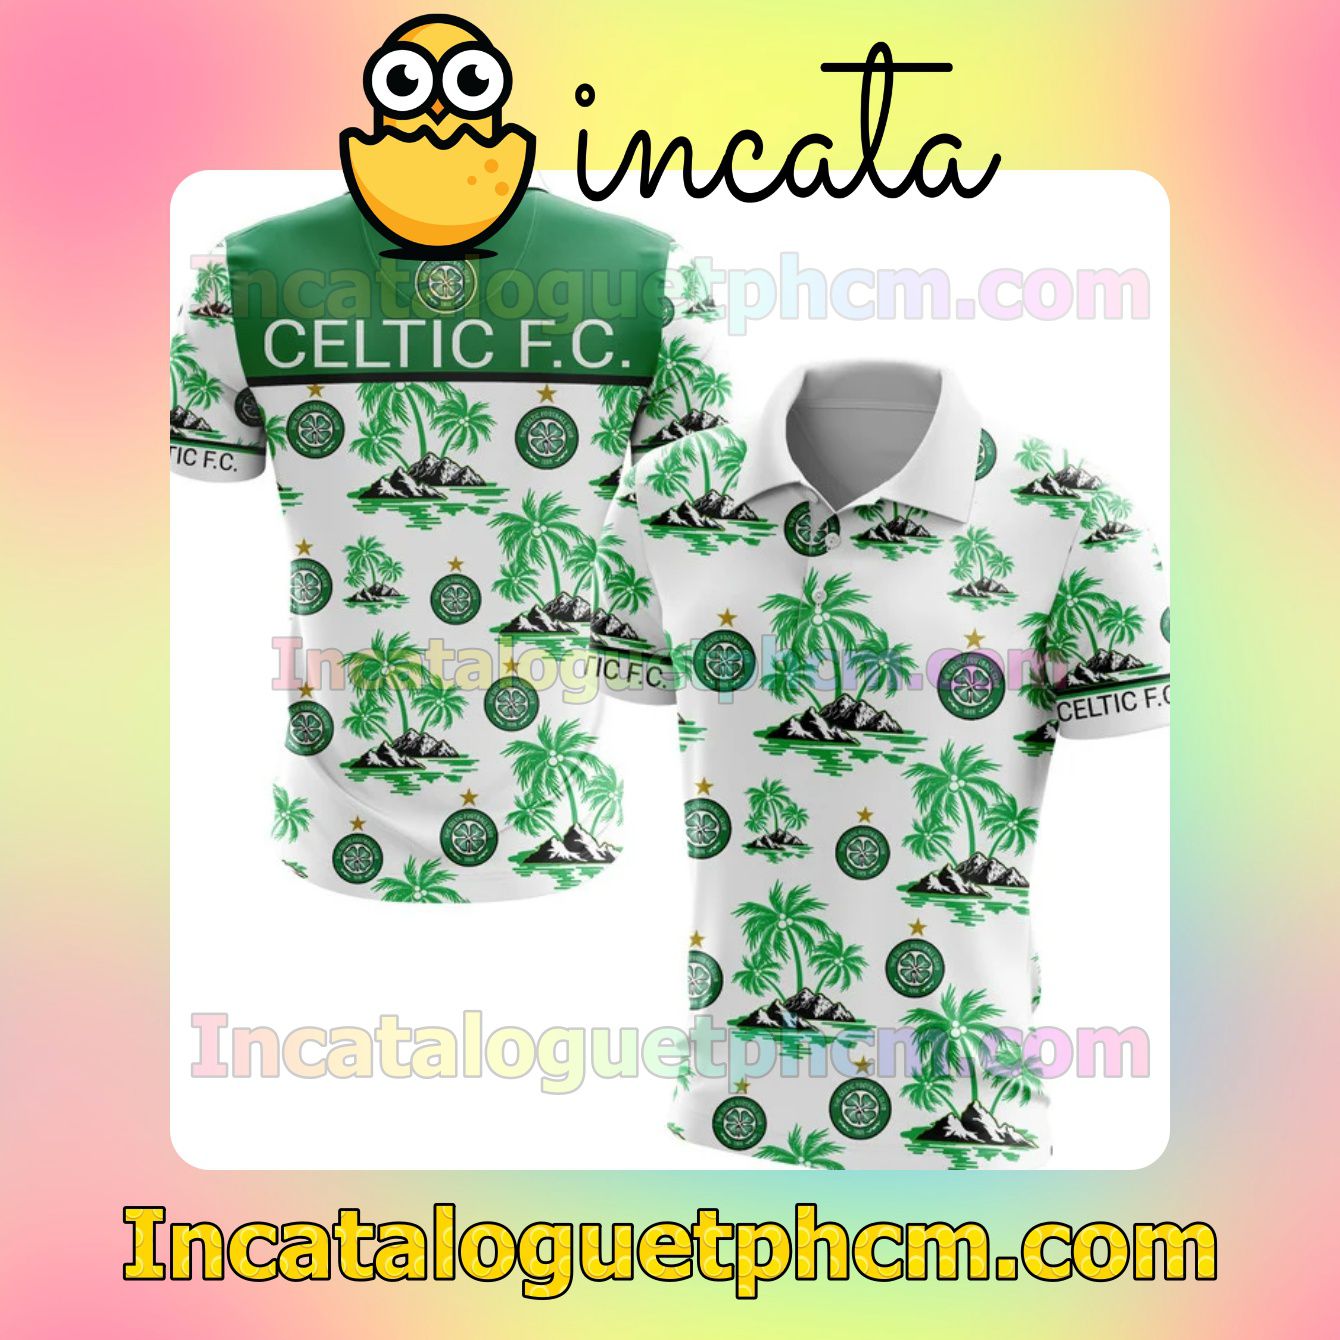 Top Rated Celtic FC Coconut Tree Long Sleeve Tee Bomber Jacket